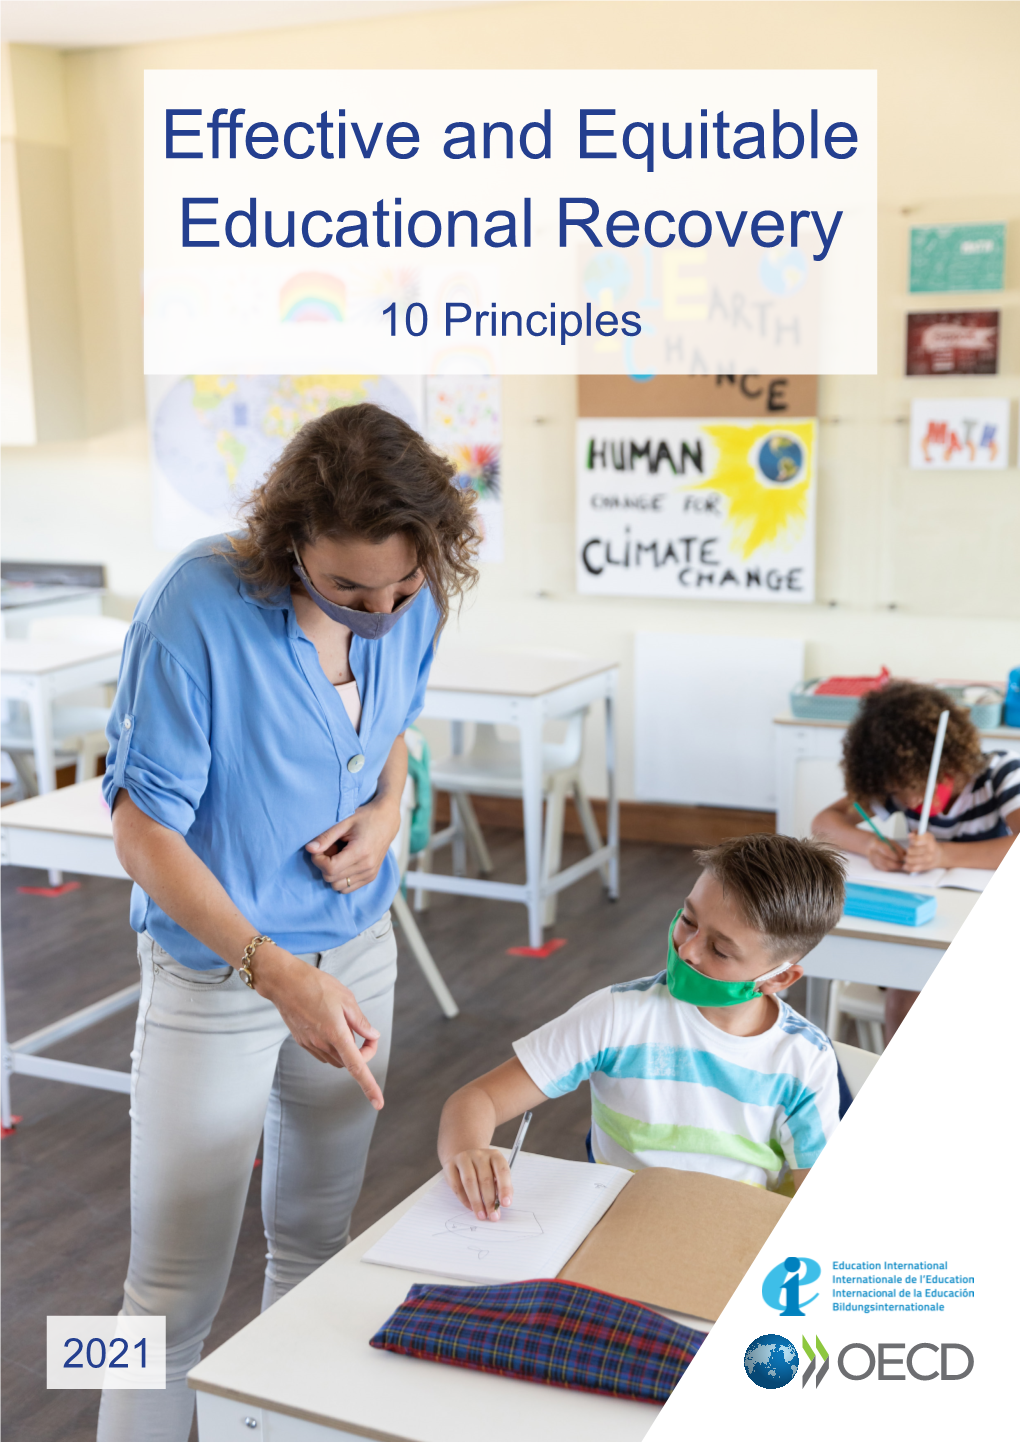 Effective and Equitable Educational Recovery 10 Principles